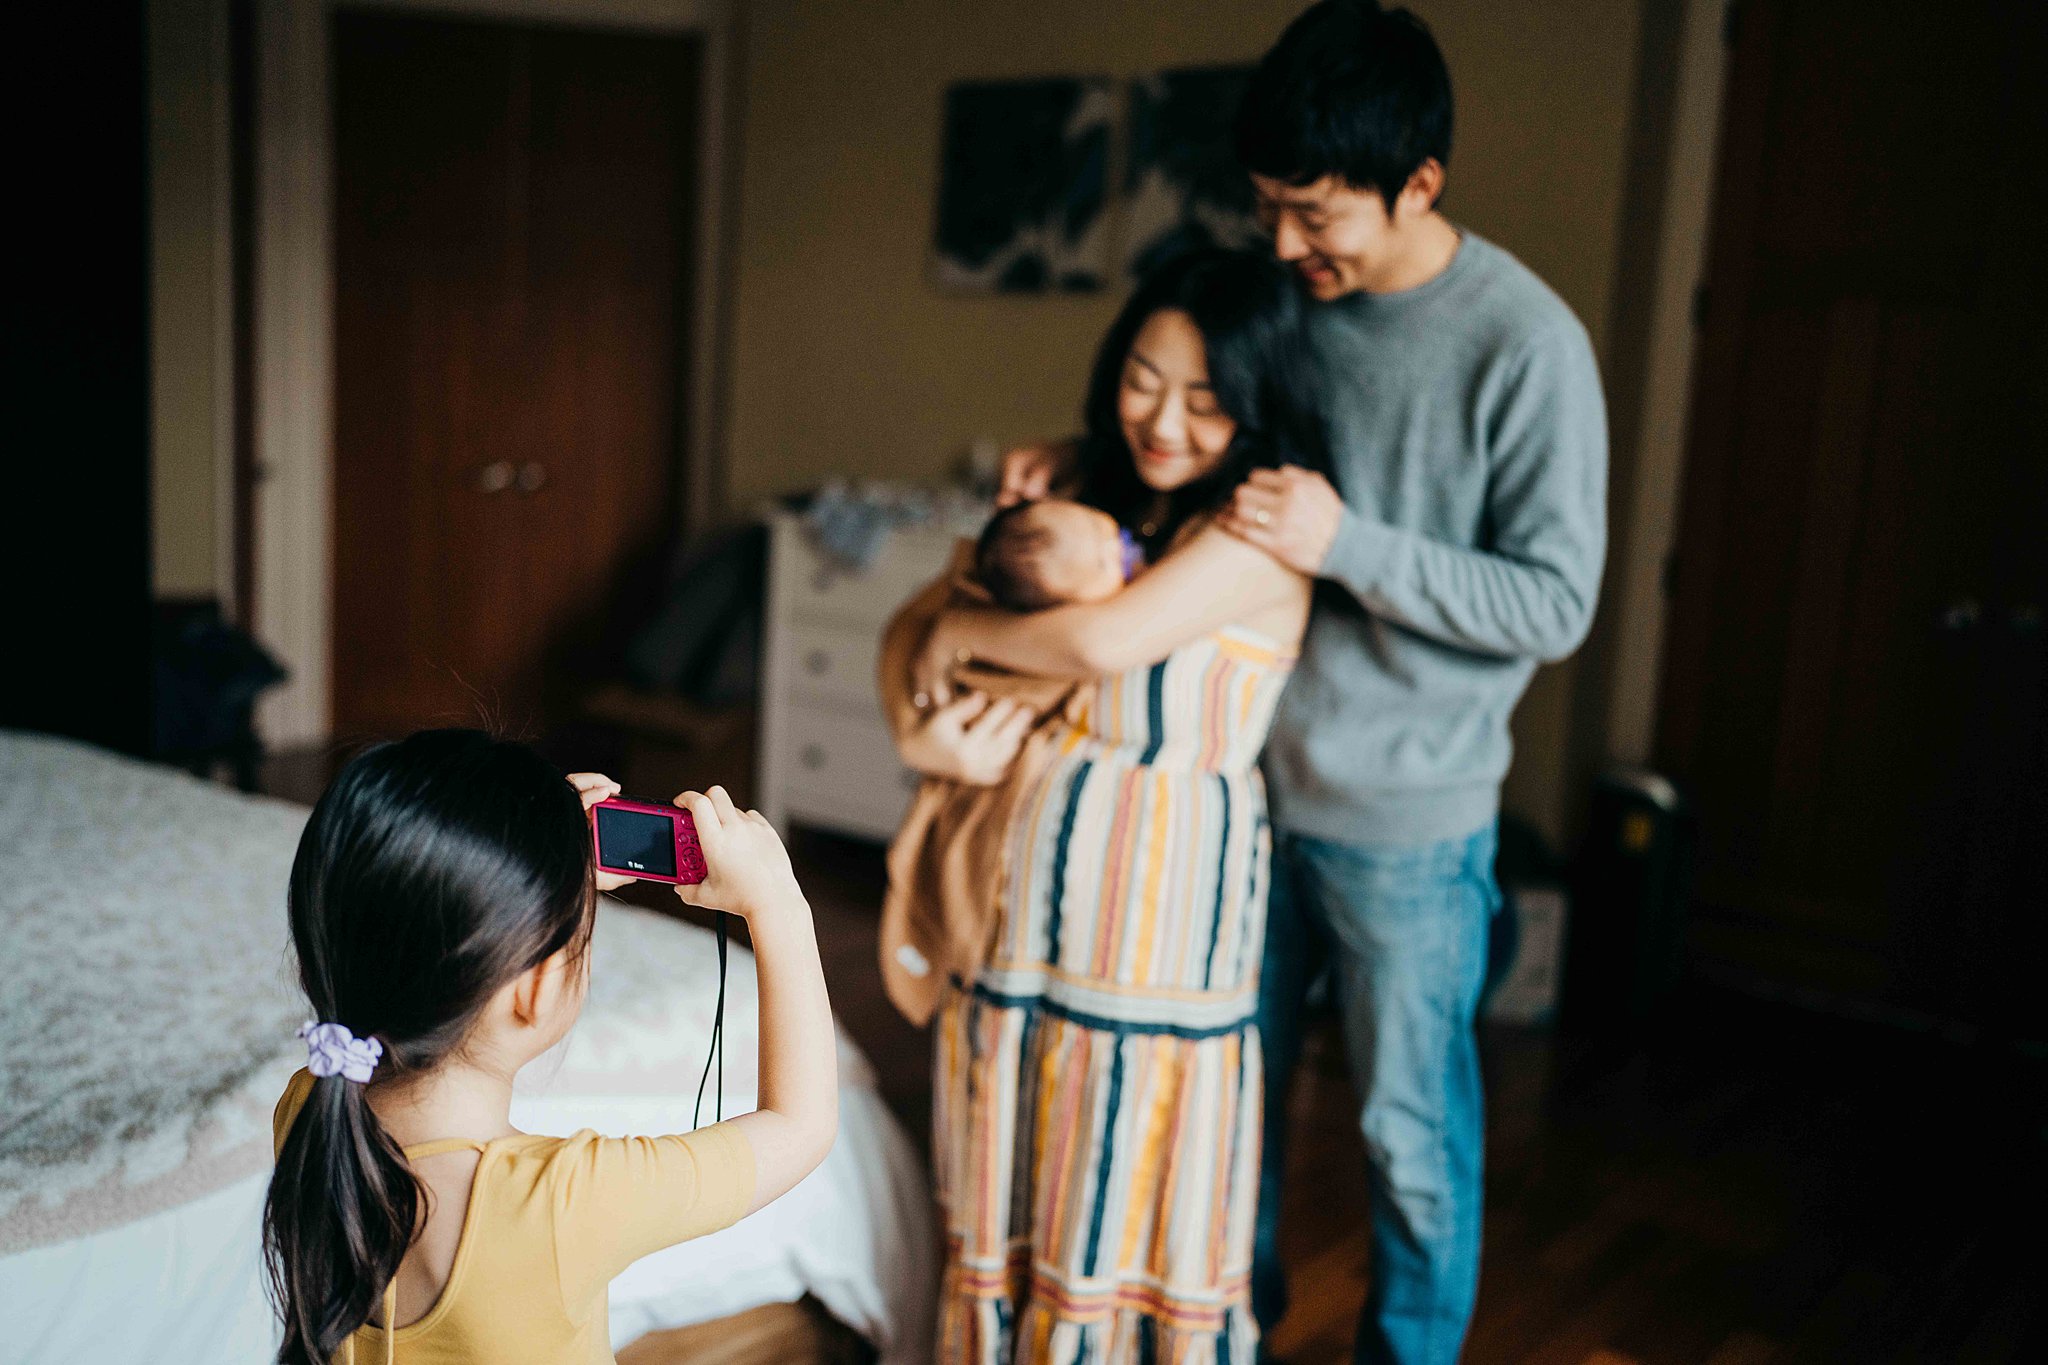 A young girl takes a picture of her parents holding their newborn baby in mom's arms with a pink camera seattle midwives